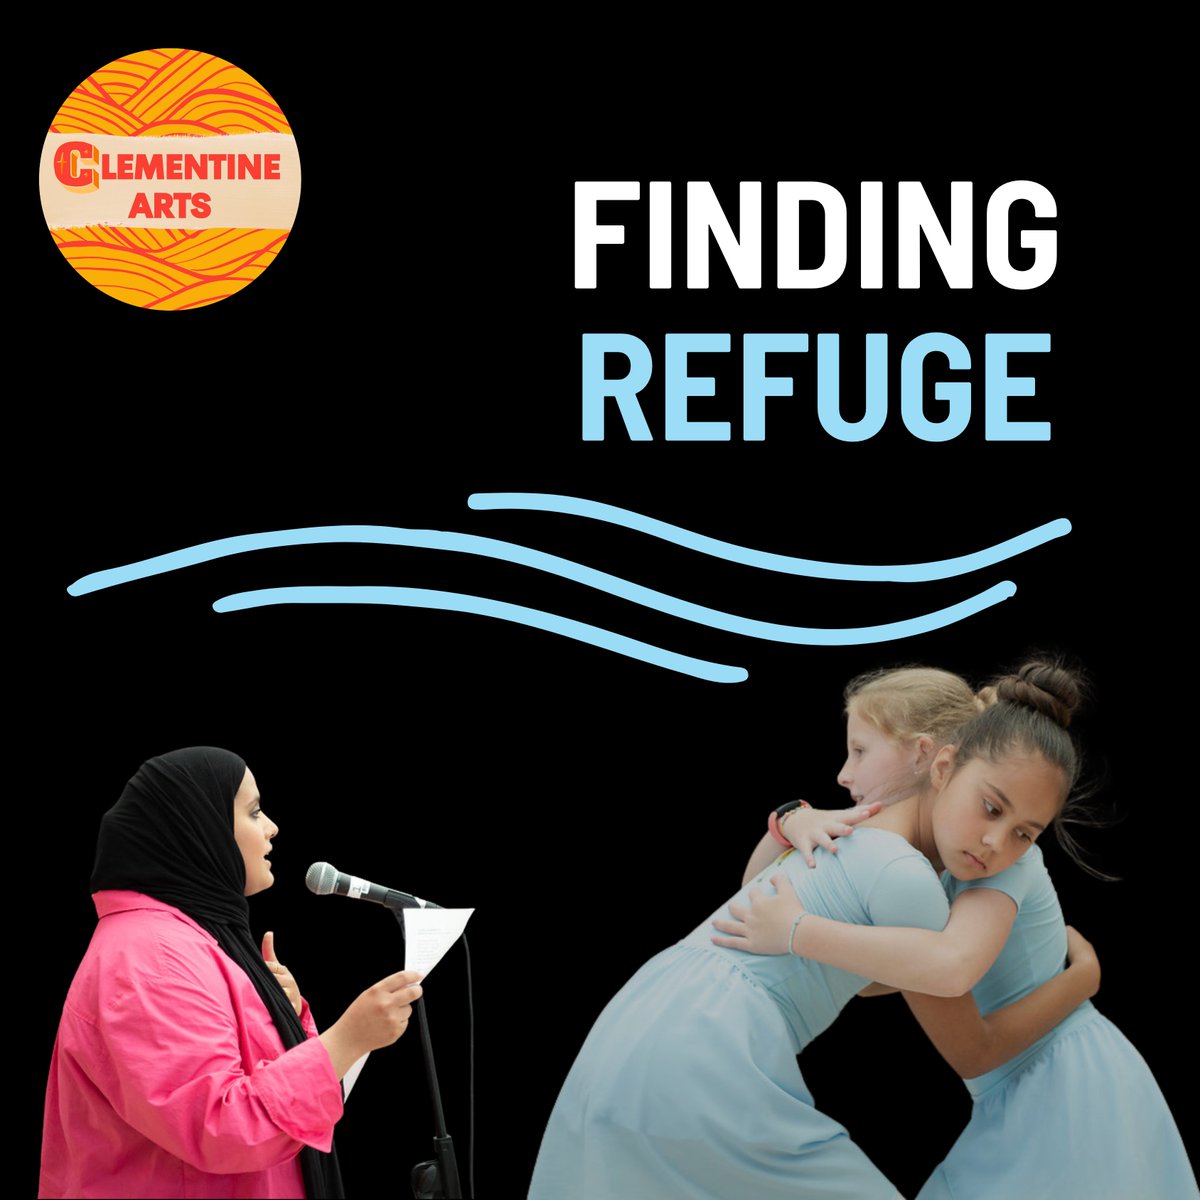 #Dance | 'Finding Refuge' at @World_Museum on 27 April is a powerful dance + spoken word piece which shares stories of asylum seekers resettled in Liverpool. Joined by poet @AminaAtiqArtist, this performance echoes the importance of welcoming refugees. bit.ly/4cQ0C4Y